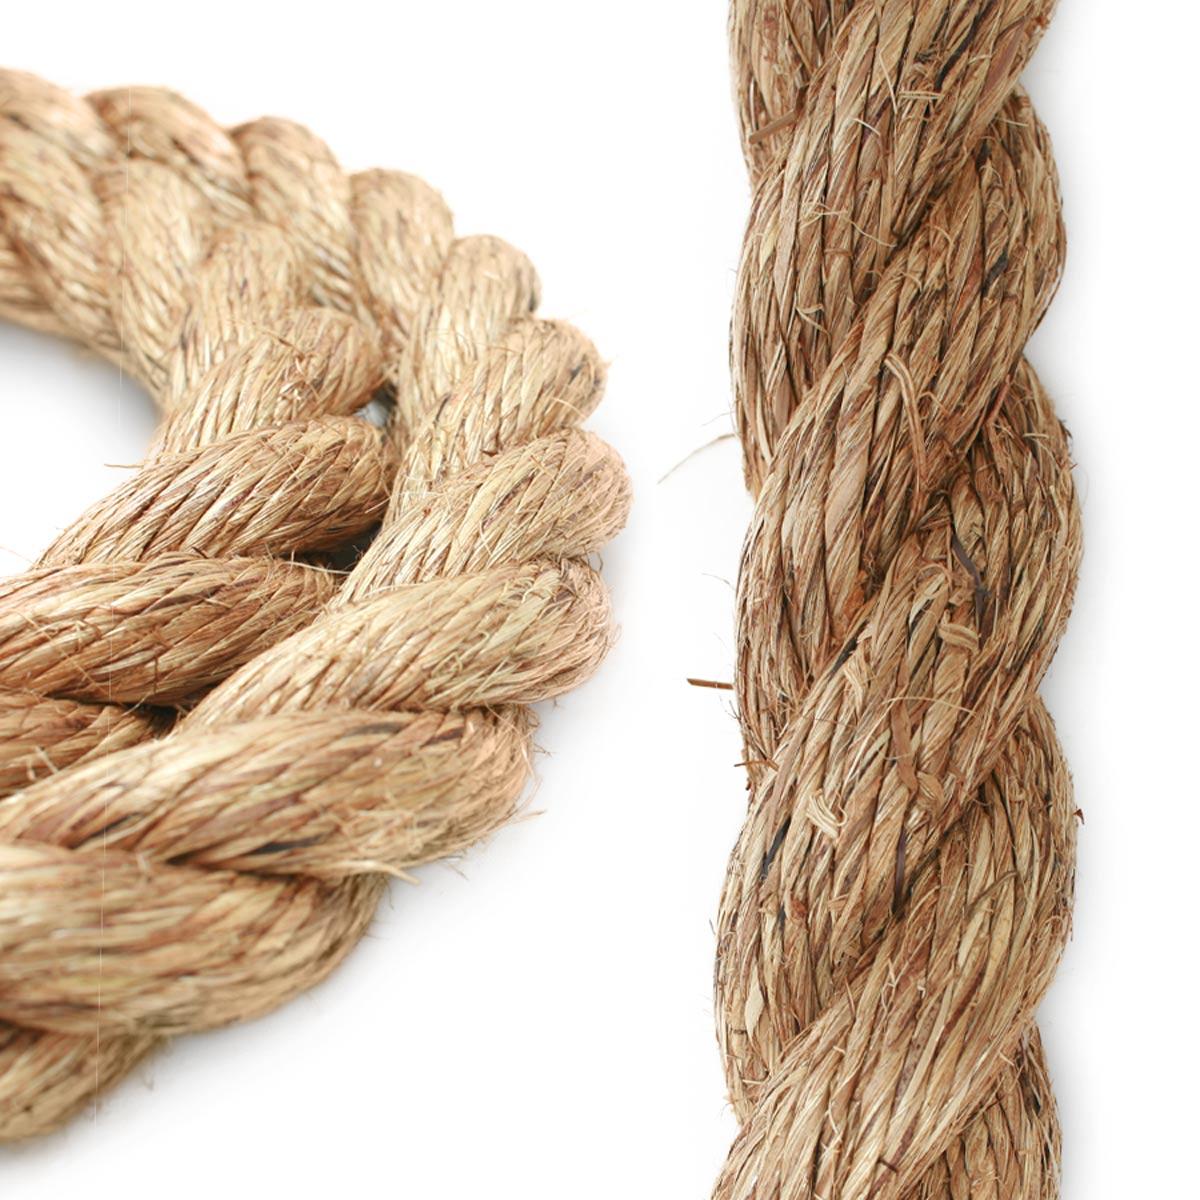 Manila Rope - 3/8 Inch Rope 600' - 3 Strand Cordage Twisted Braided Rope -  Thick Natural Fiber Rope for Nautical, Marine, Decorative Rope for Crafts